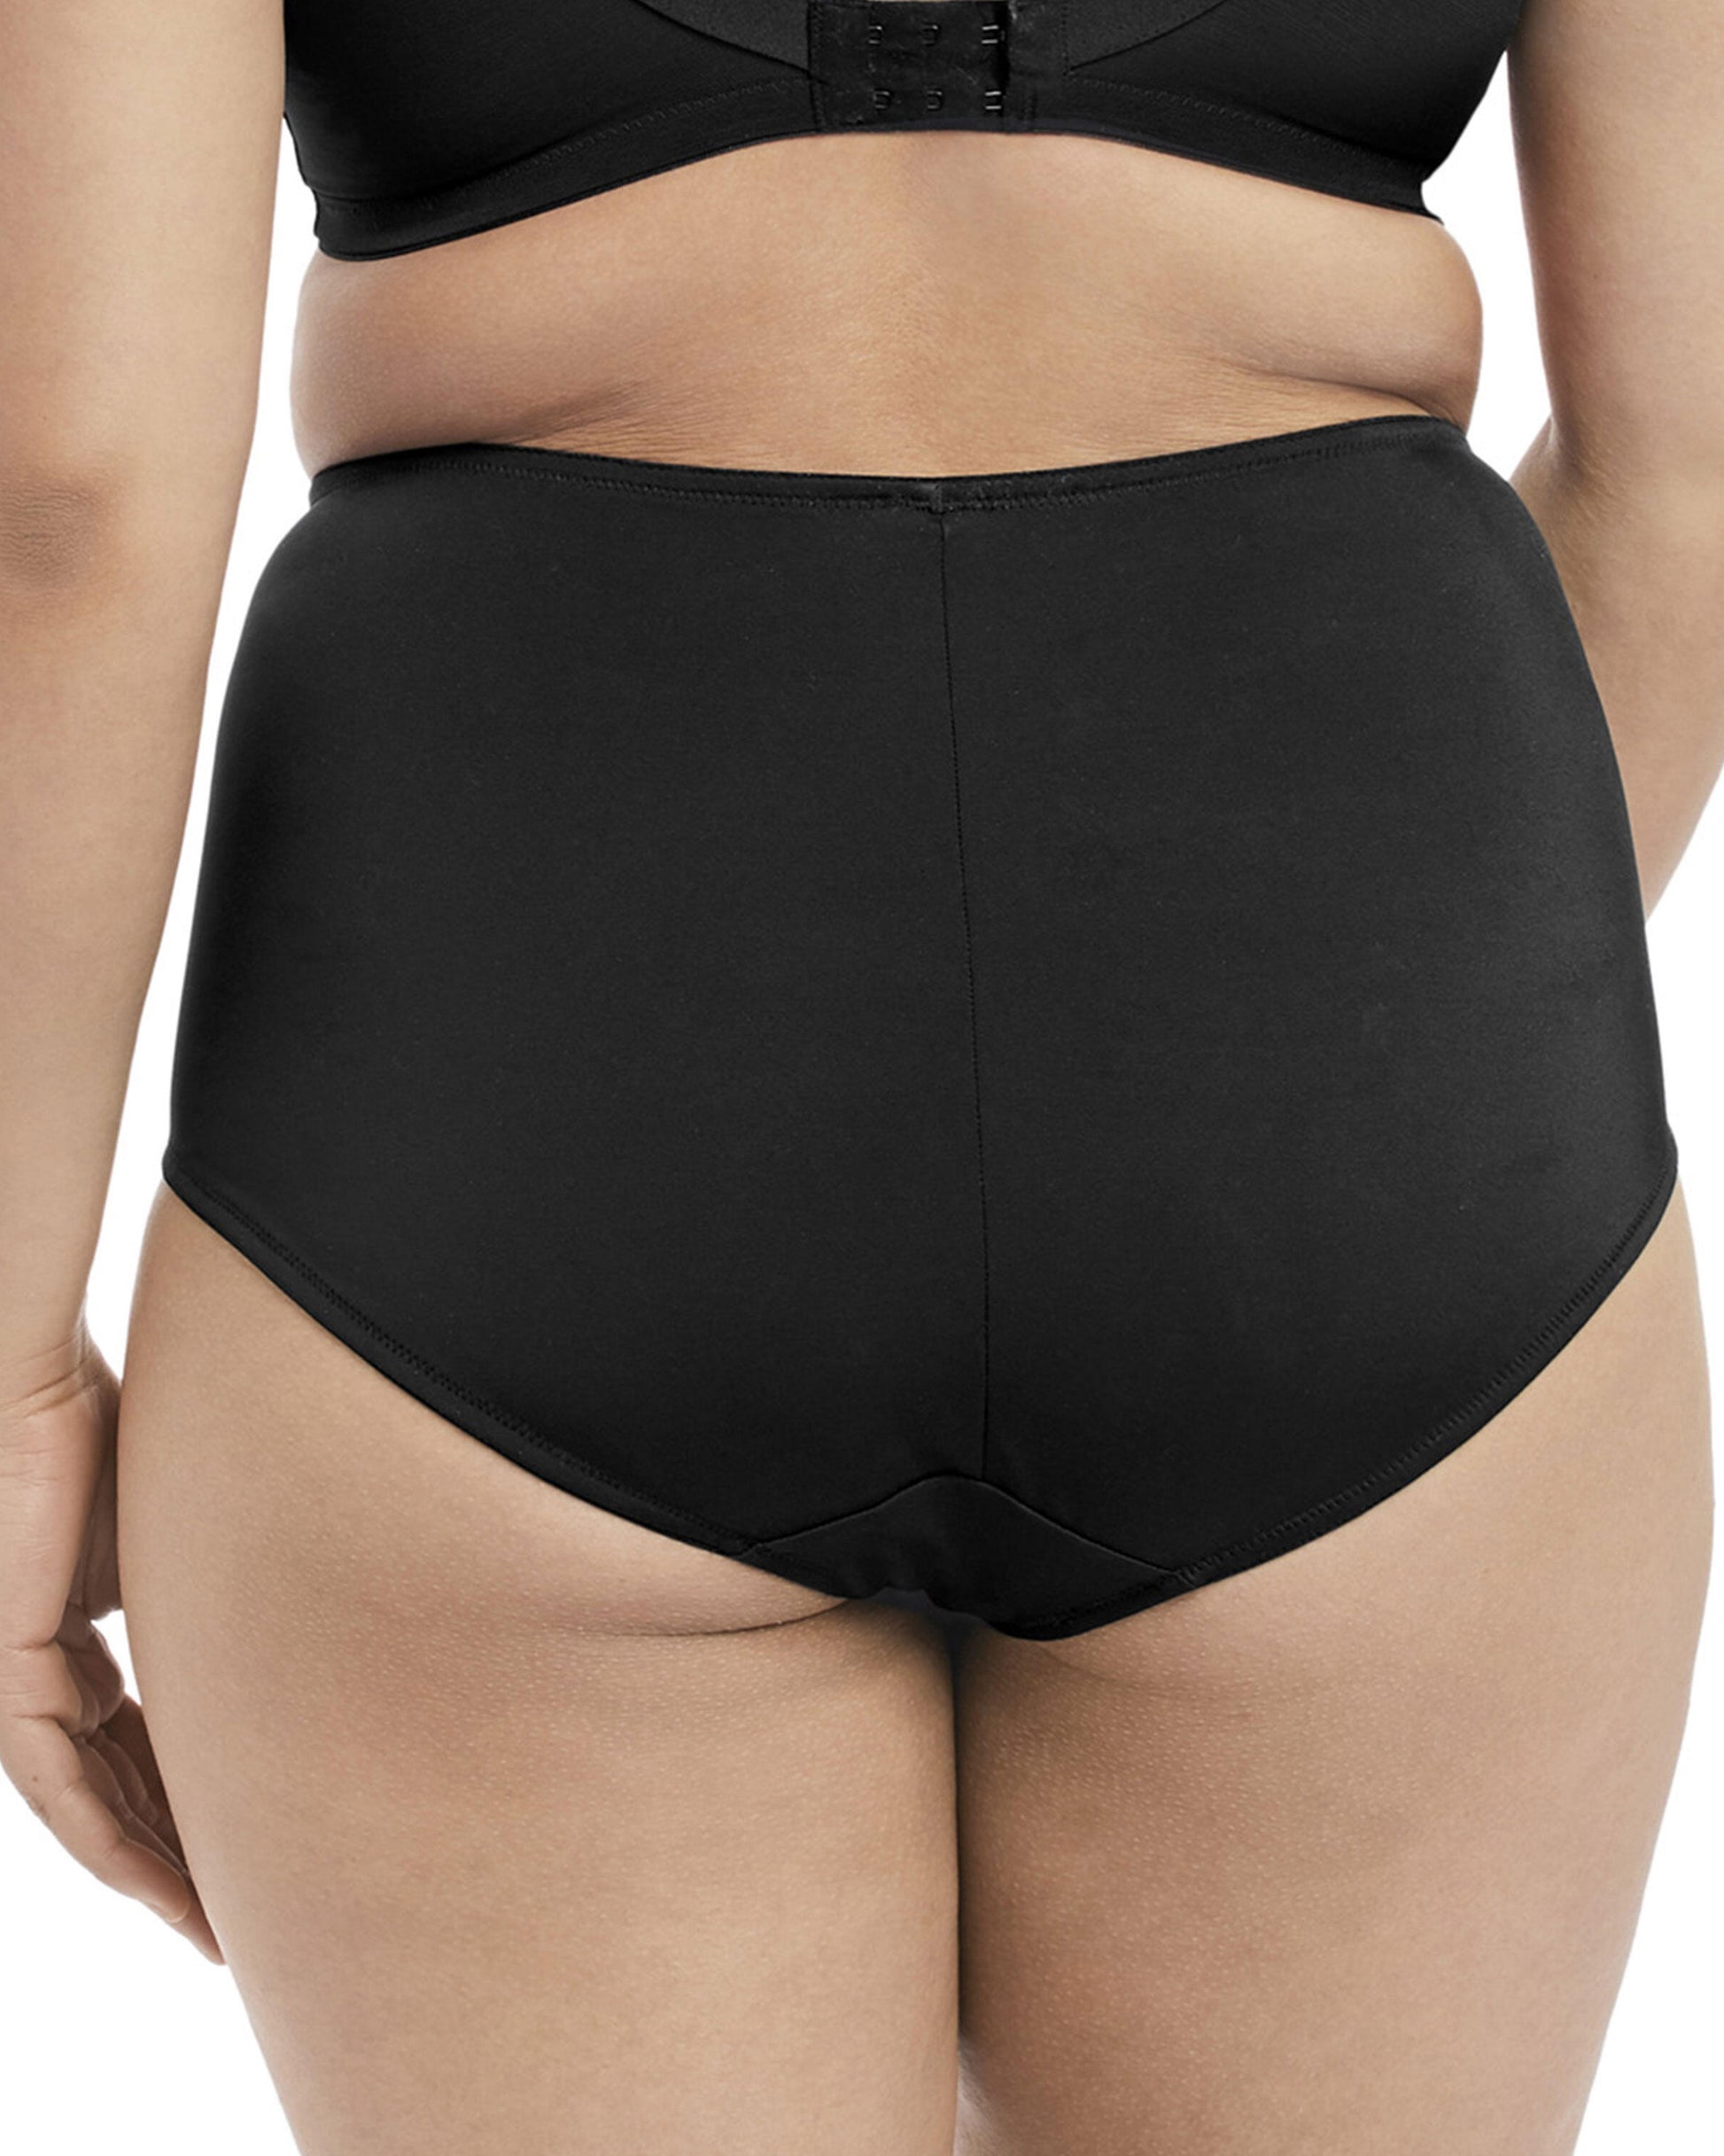 Model wearing a high waist full brief panty with mesh inserts in black